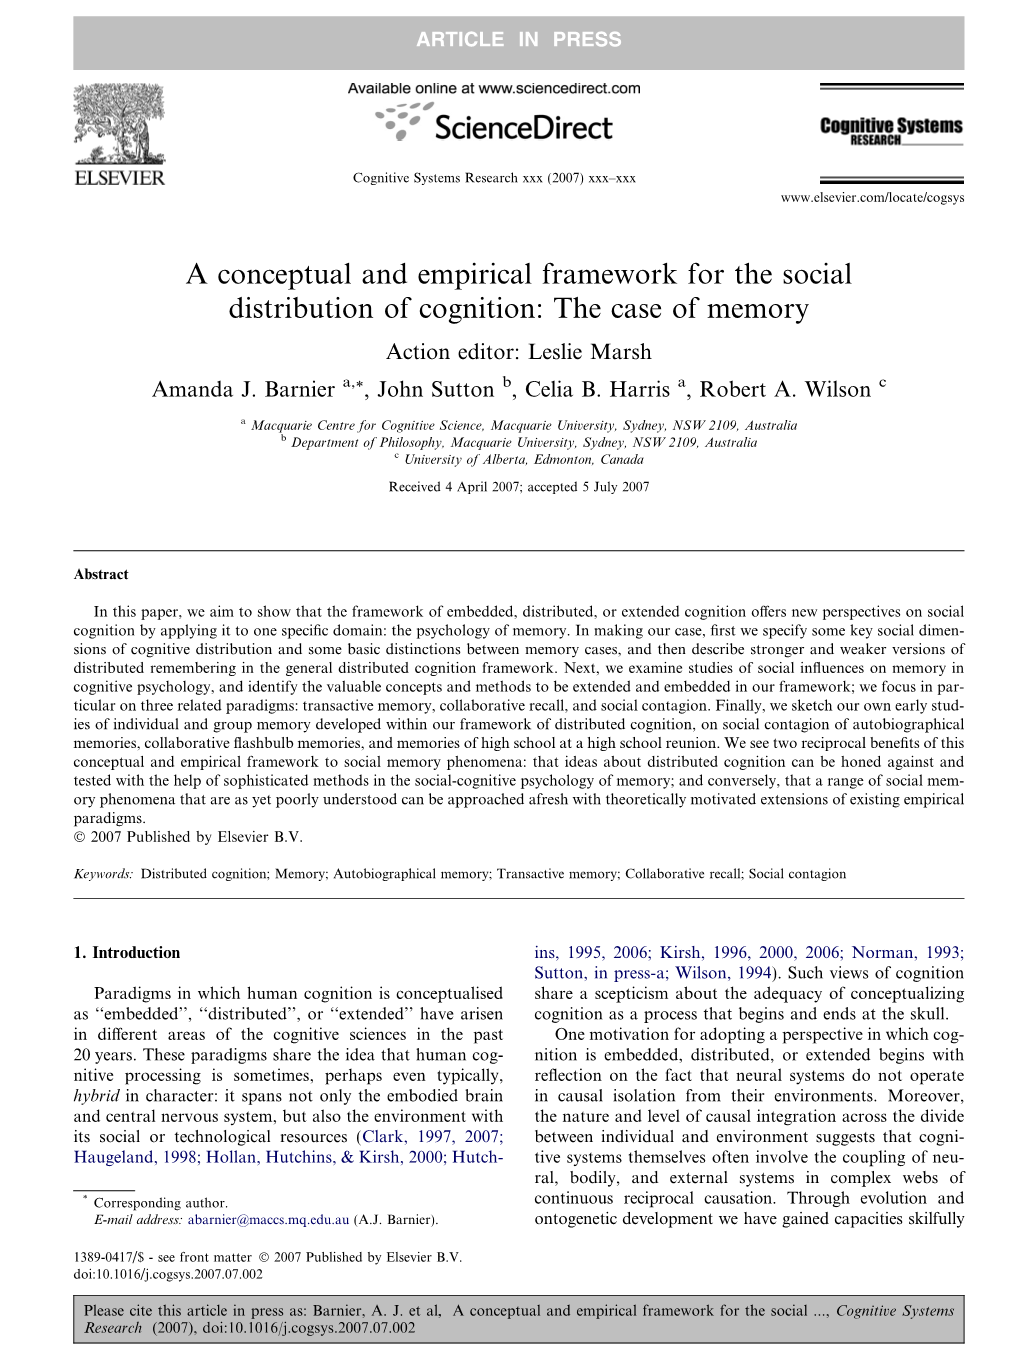 A Conceptual and Empirical Framework for the Social Distribution of Cognition: the Case of Memory Action Editor: Leslie Marsh Amanda J